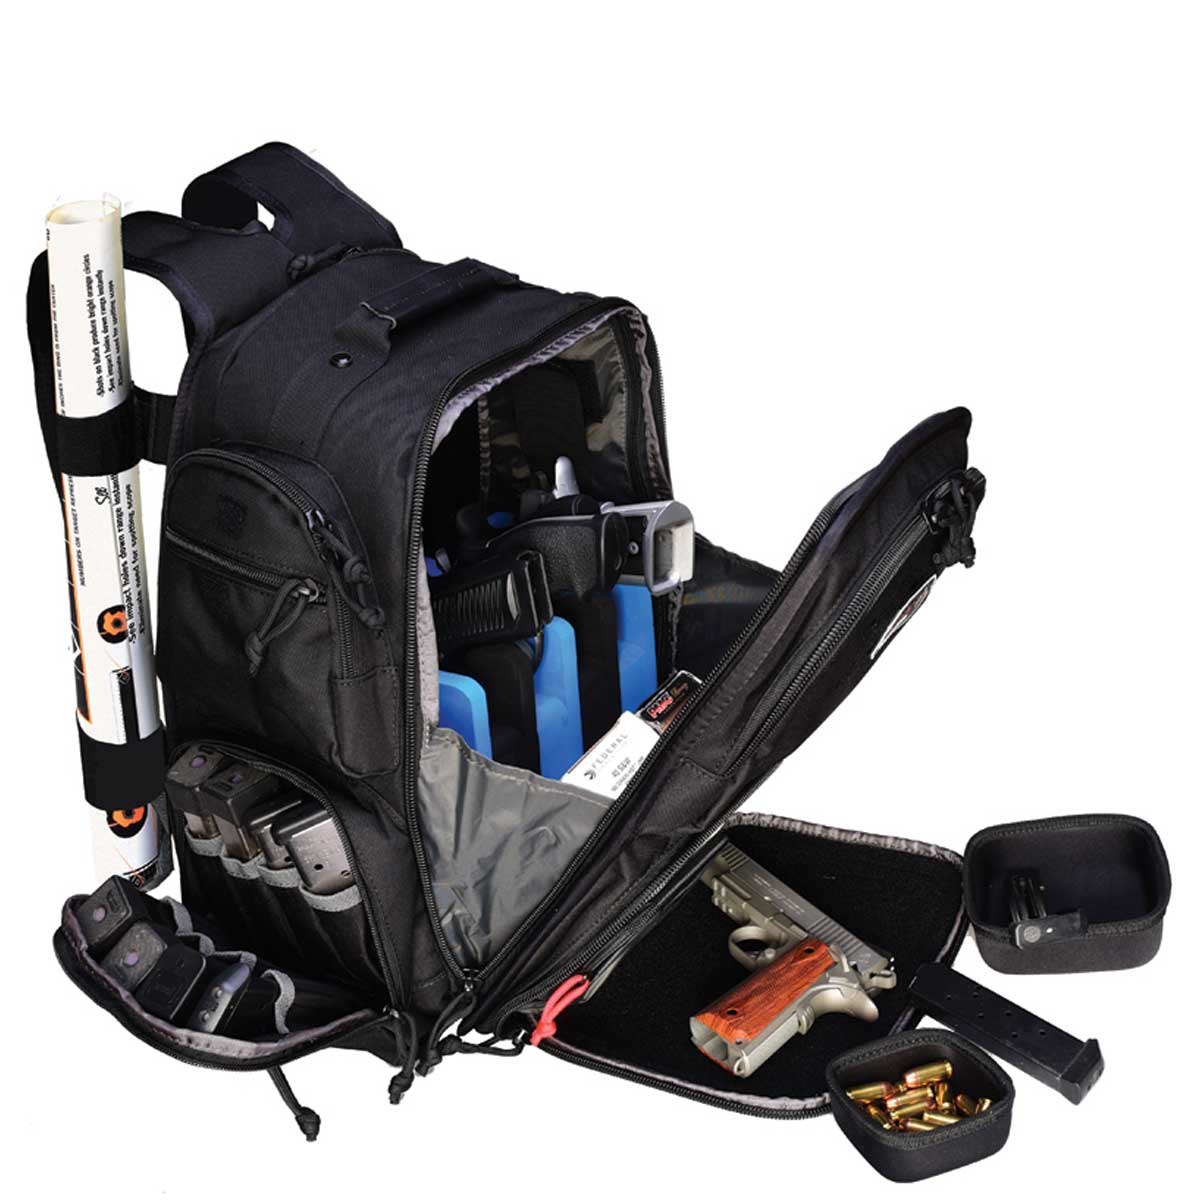 G.P.S. EXECUTIVE RANGE BACKPACK WITH CRADLE Photo